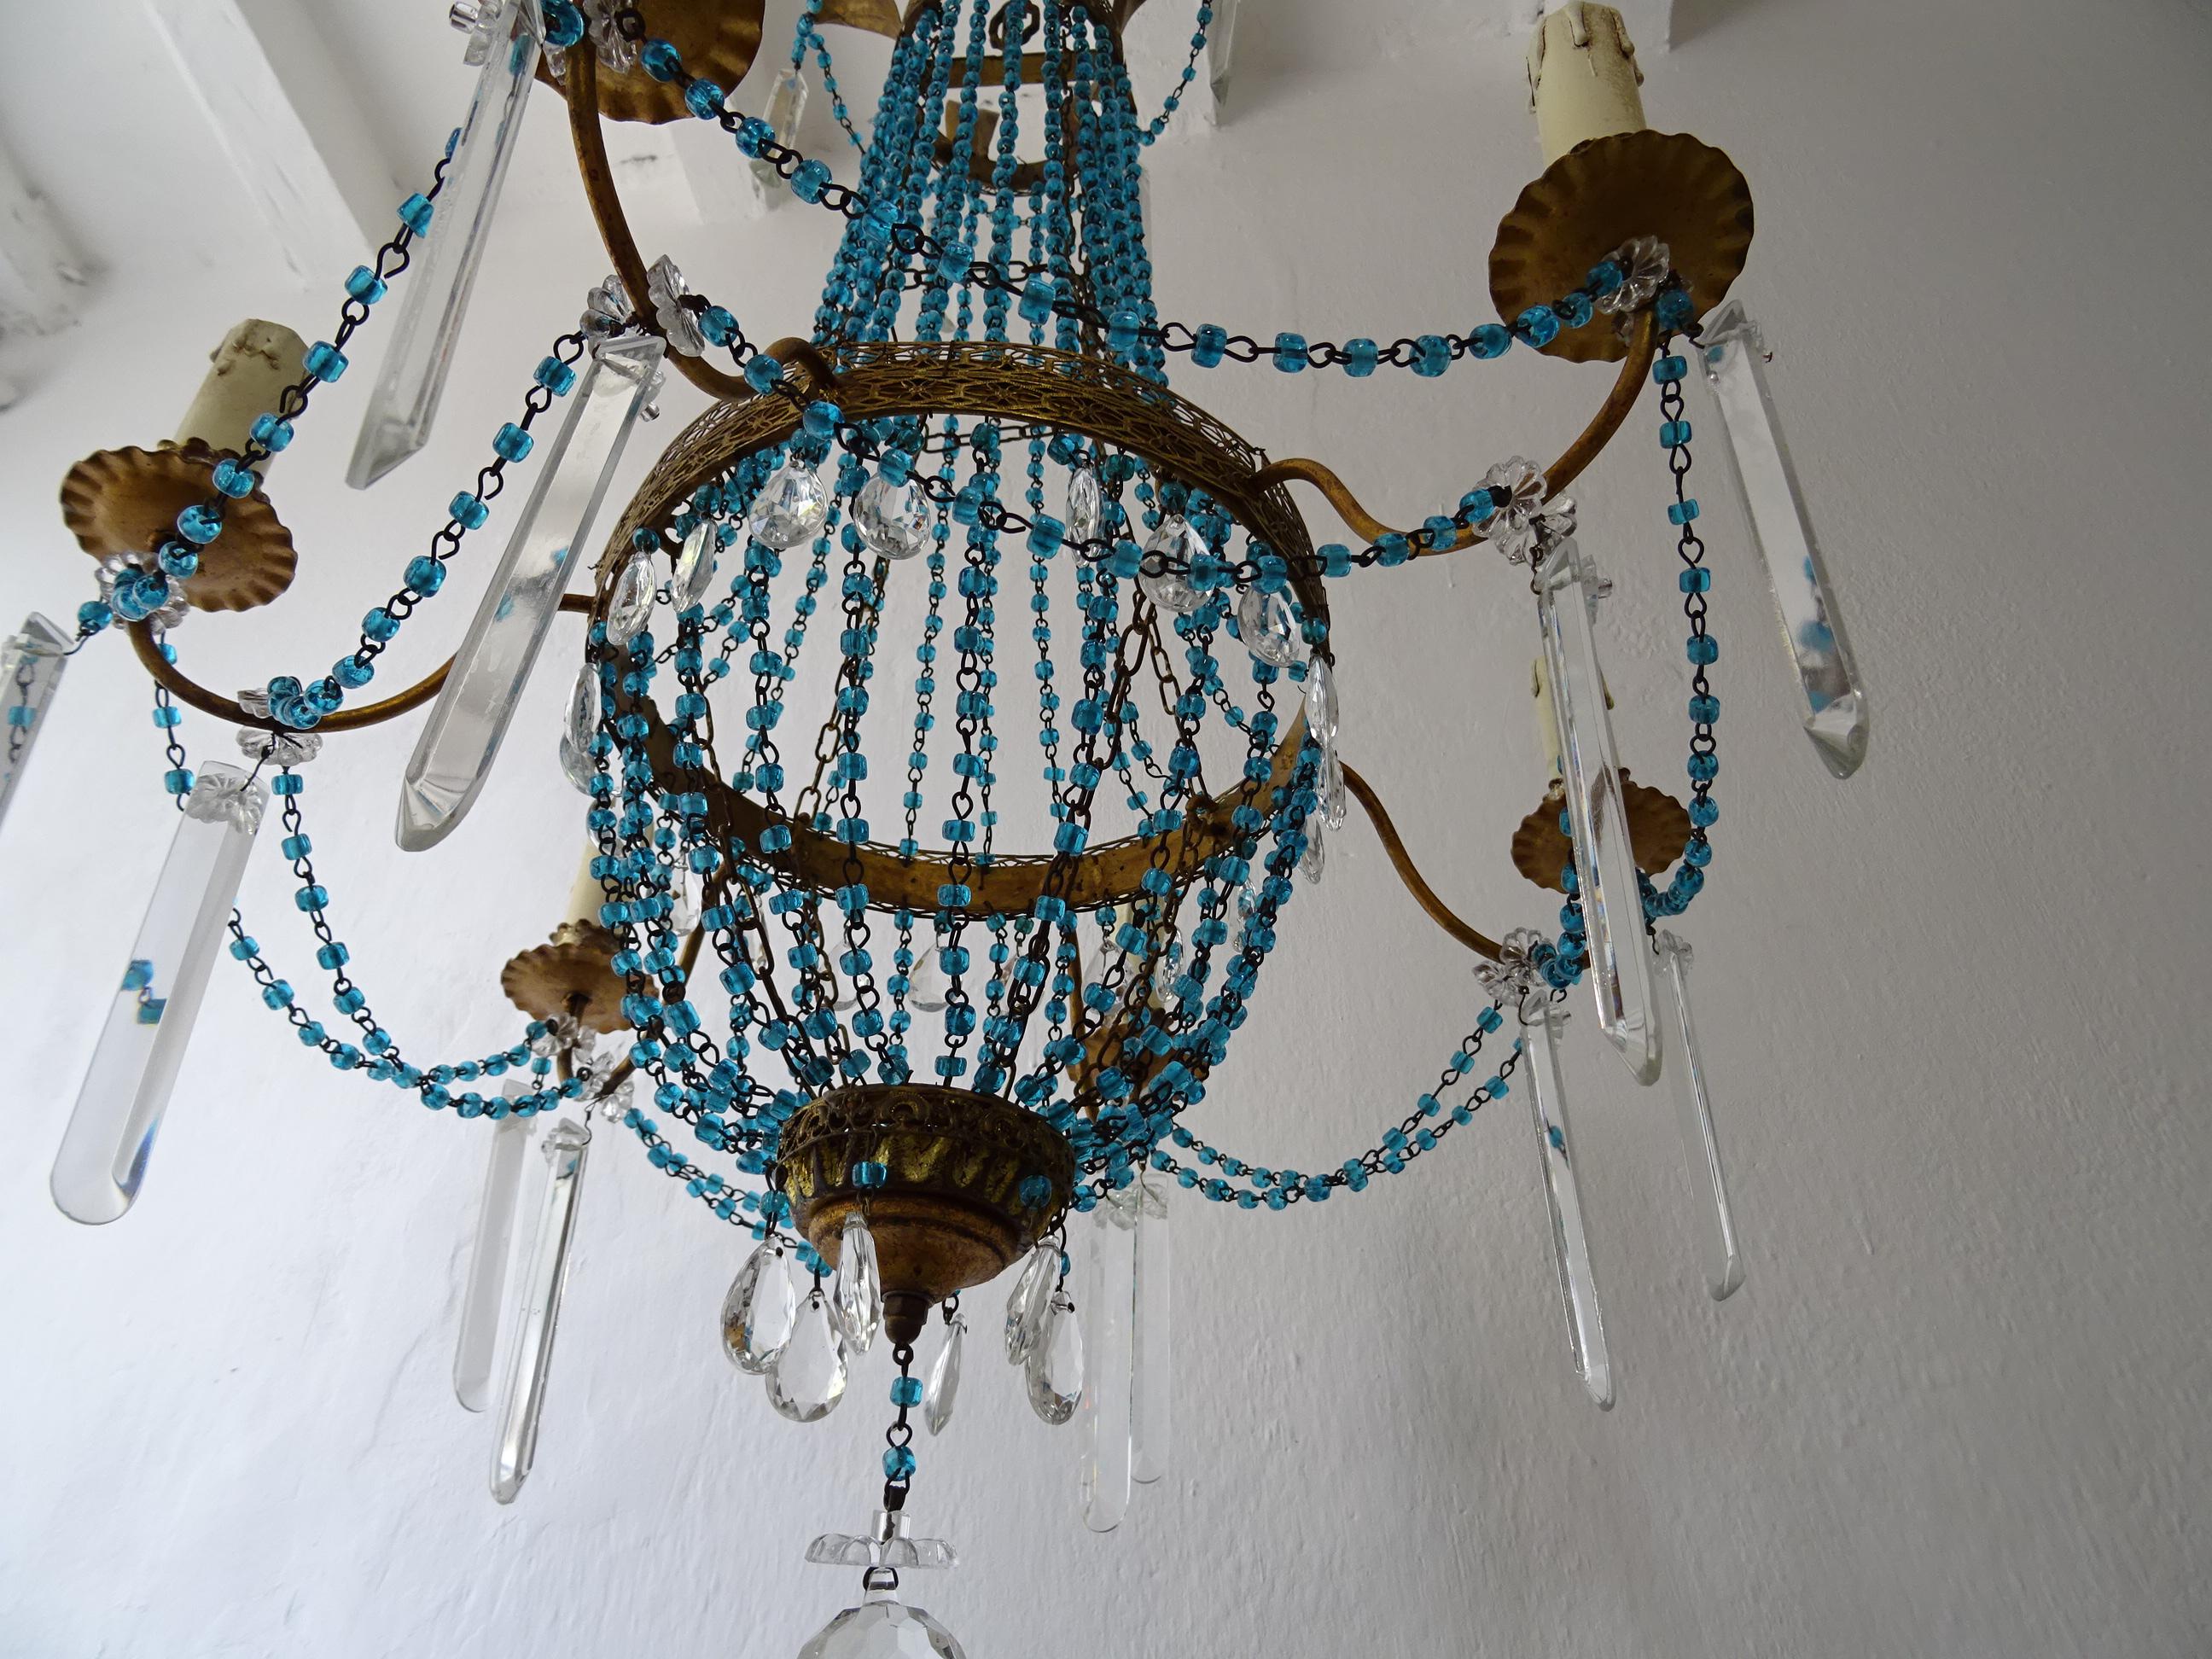 Early 20th Century Italian Empire Blue Glass Beads Crystal Prisms Tole Chandelier, c 1900 For Sale